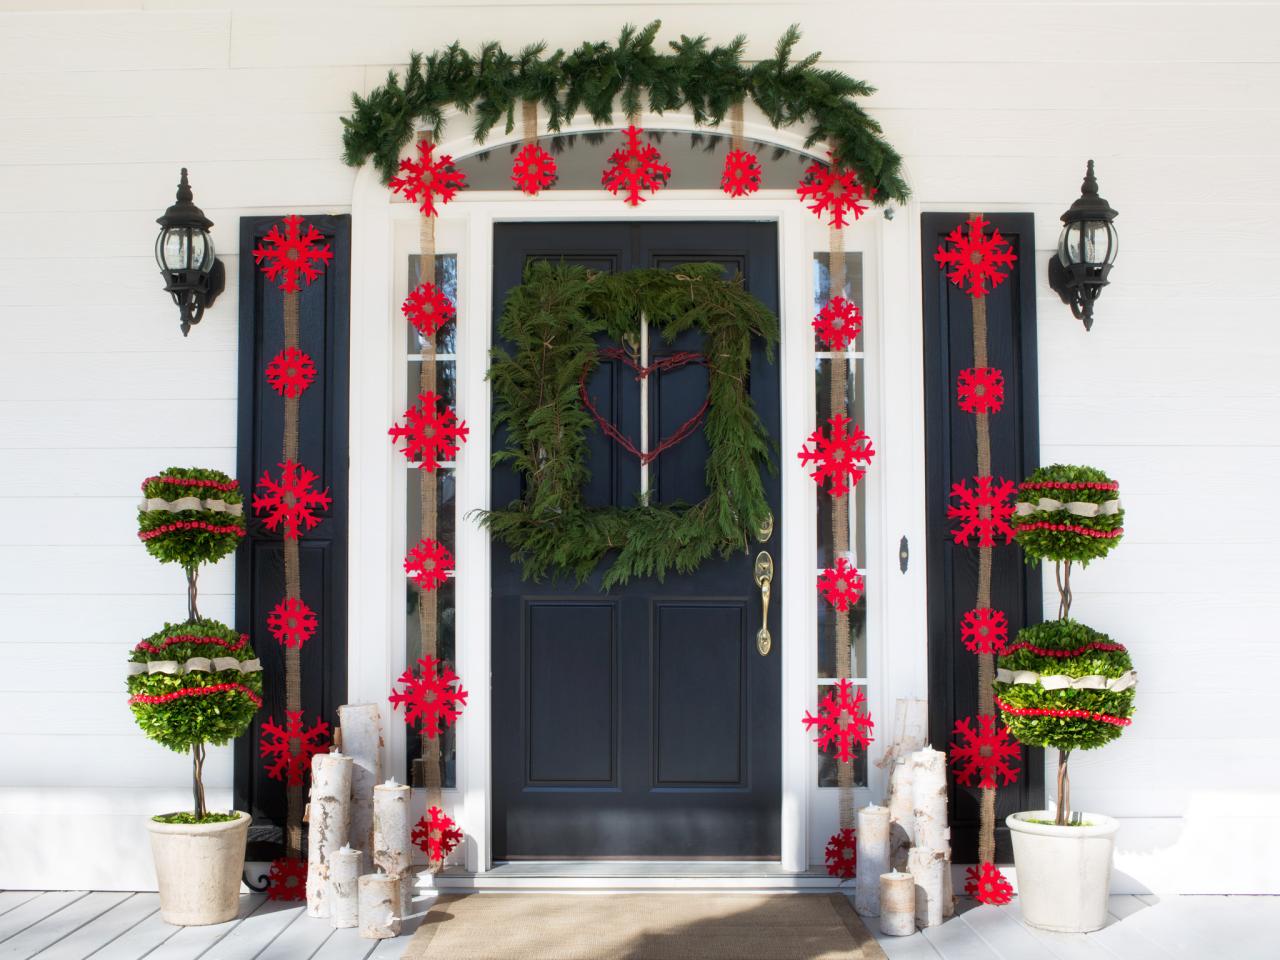 20 Festive Front Porch Decorating Ideas For The Holidays Hgtv S